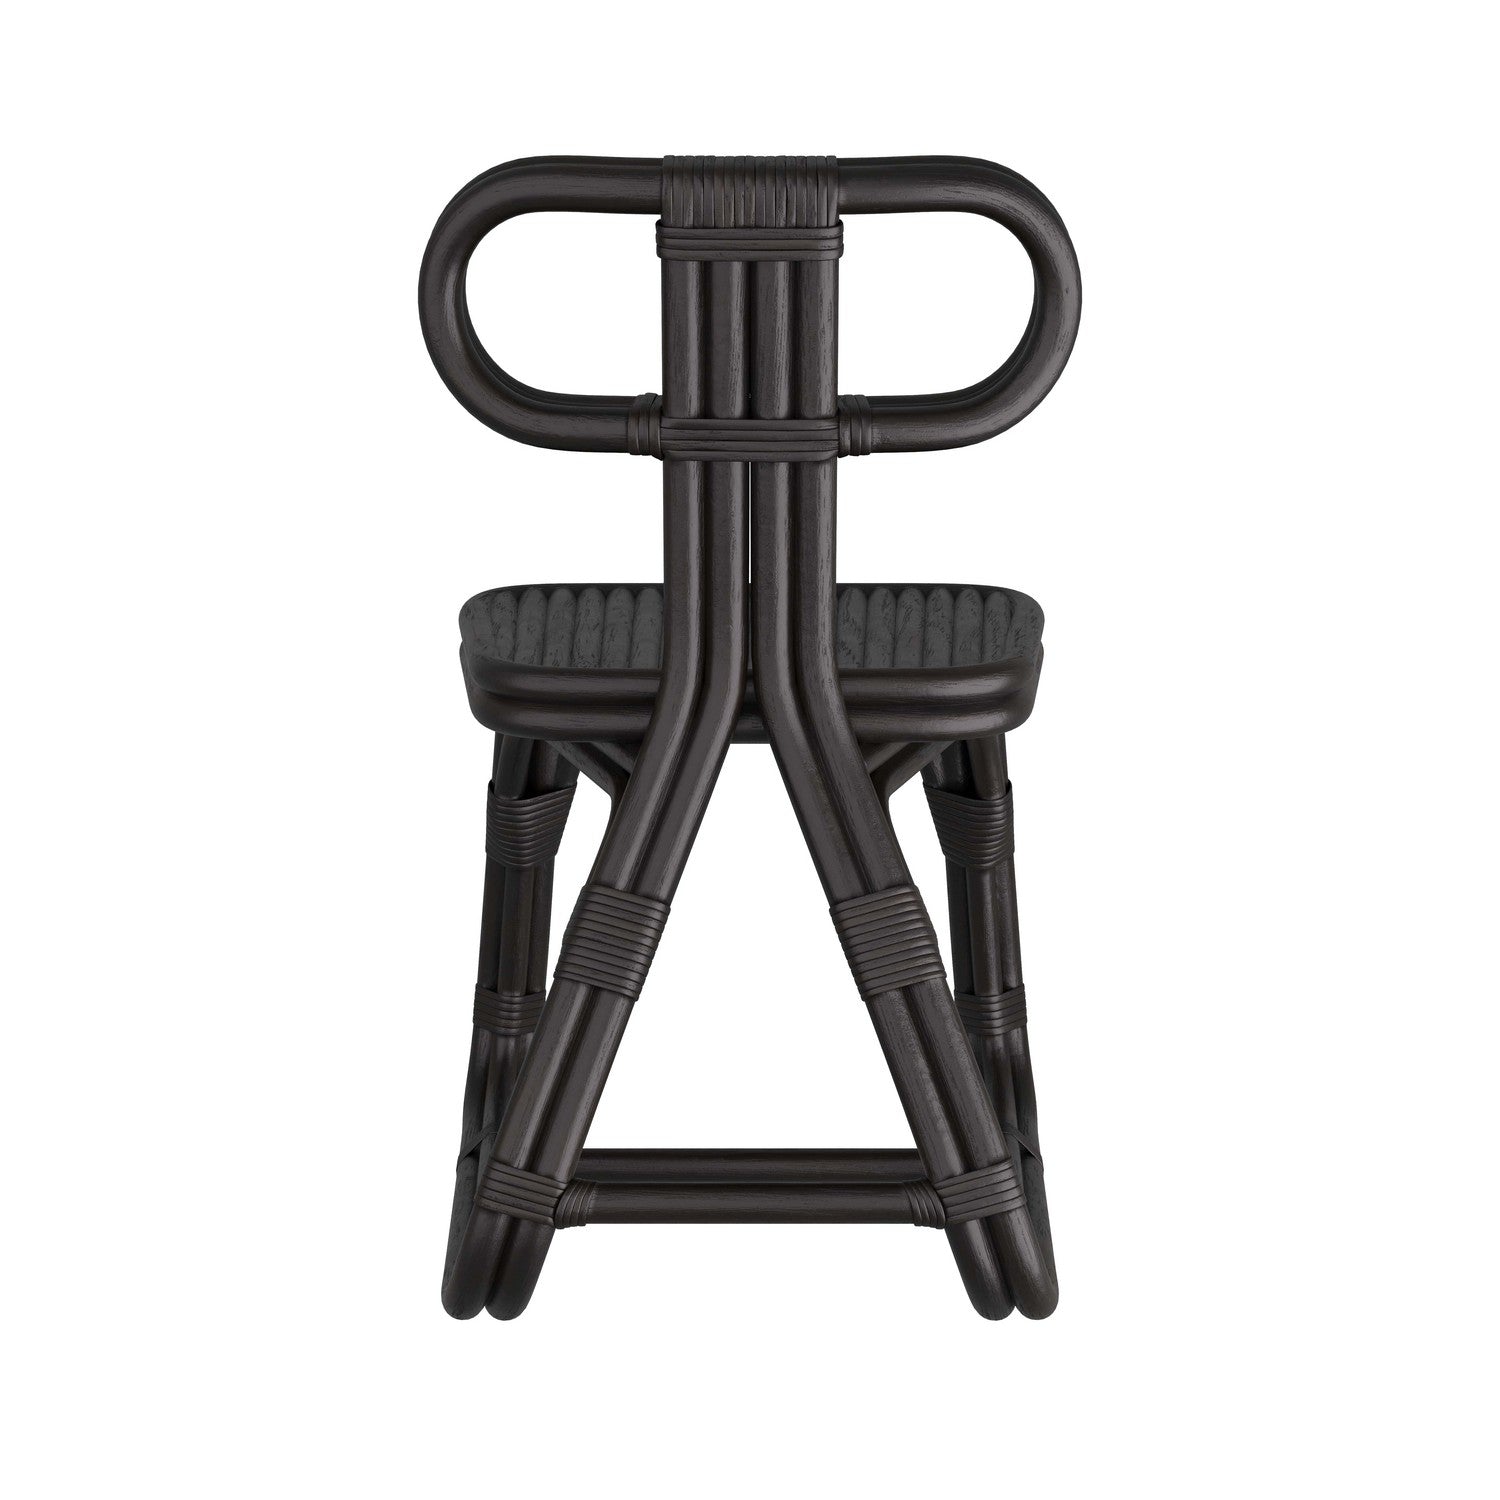 Dining Chair from the Urbana collection in Black finish